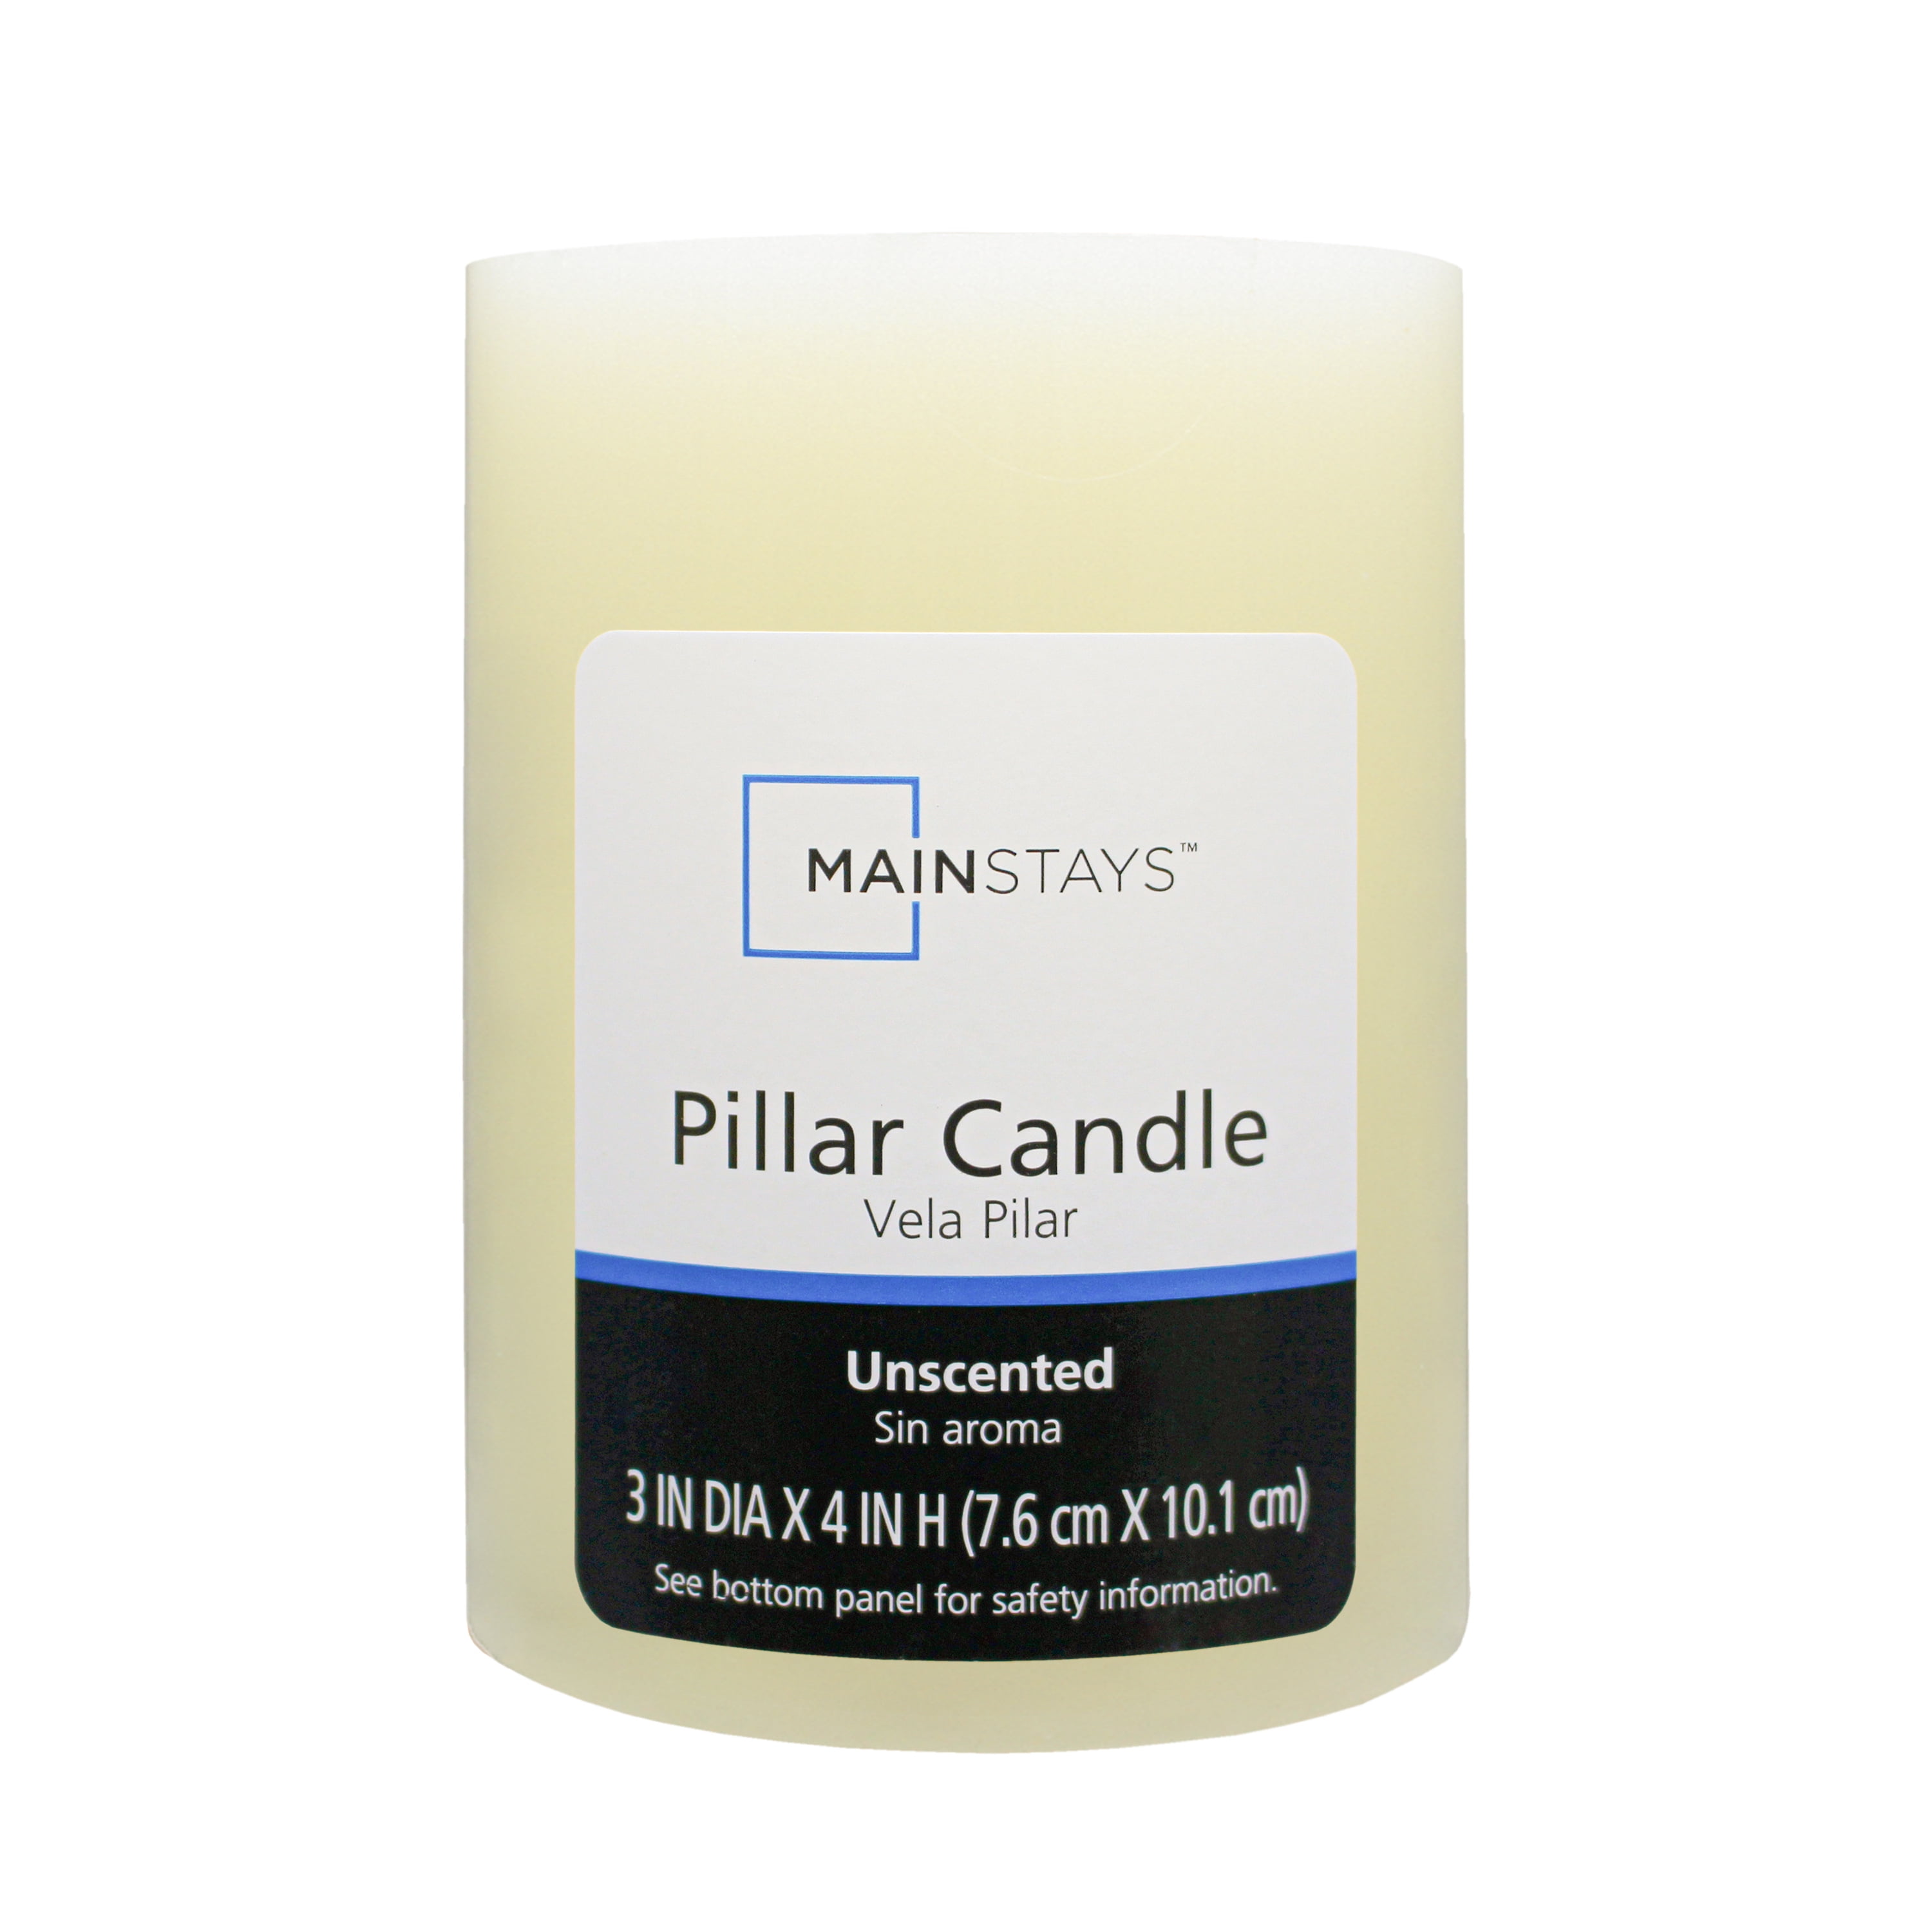 Mainstays Unscented Pillar Candles, 3x4 inches, Ivory